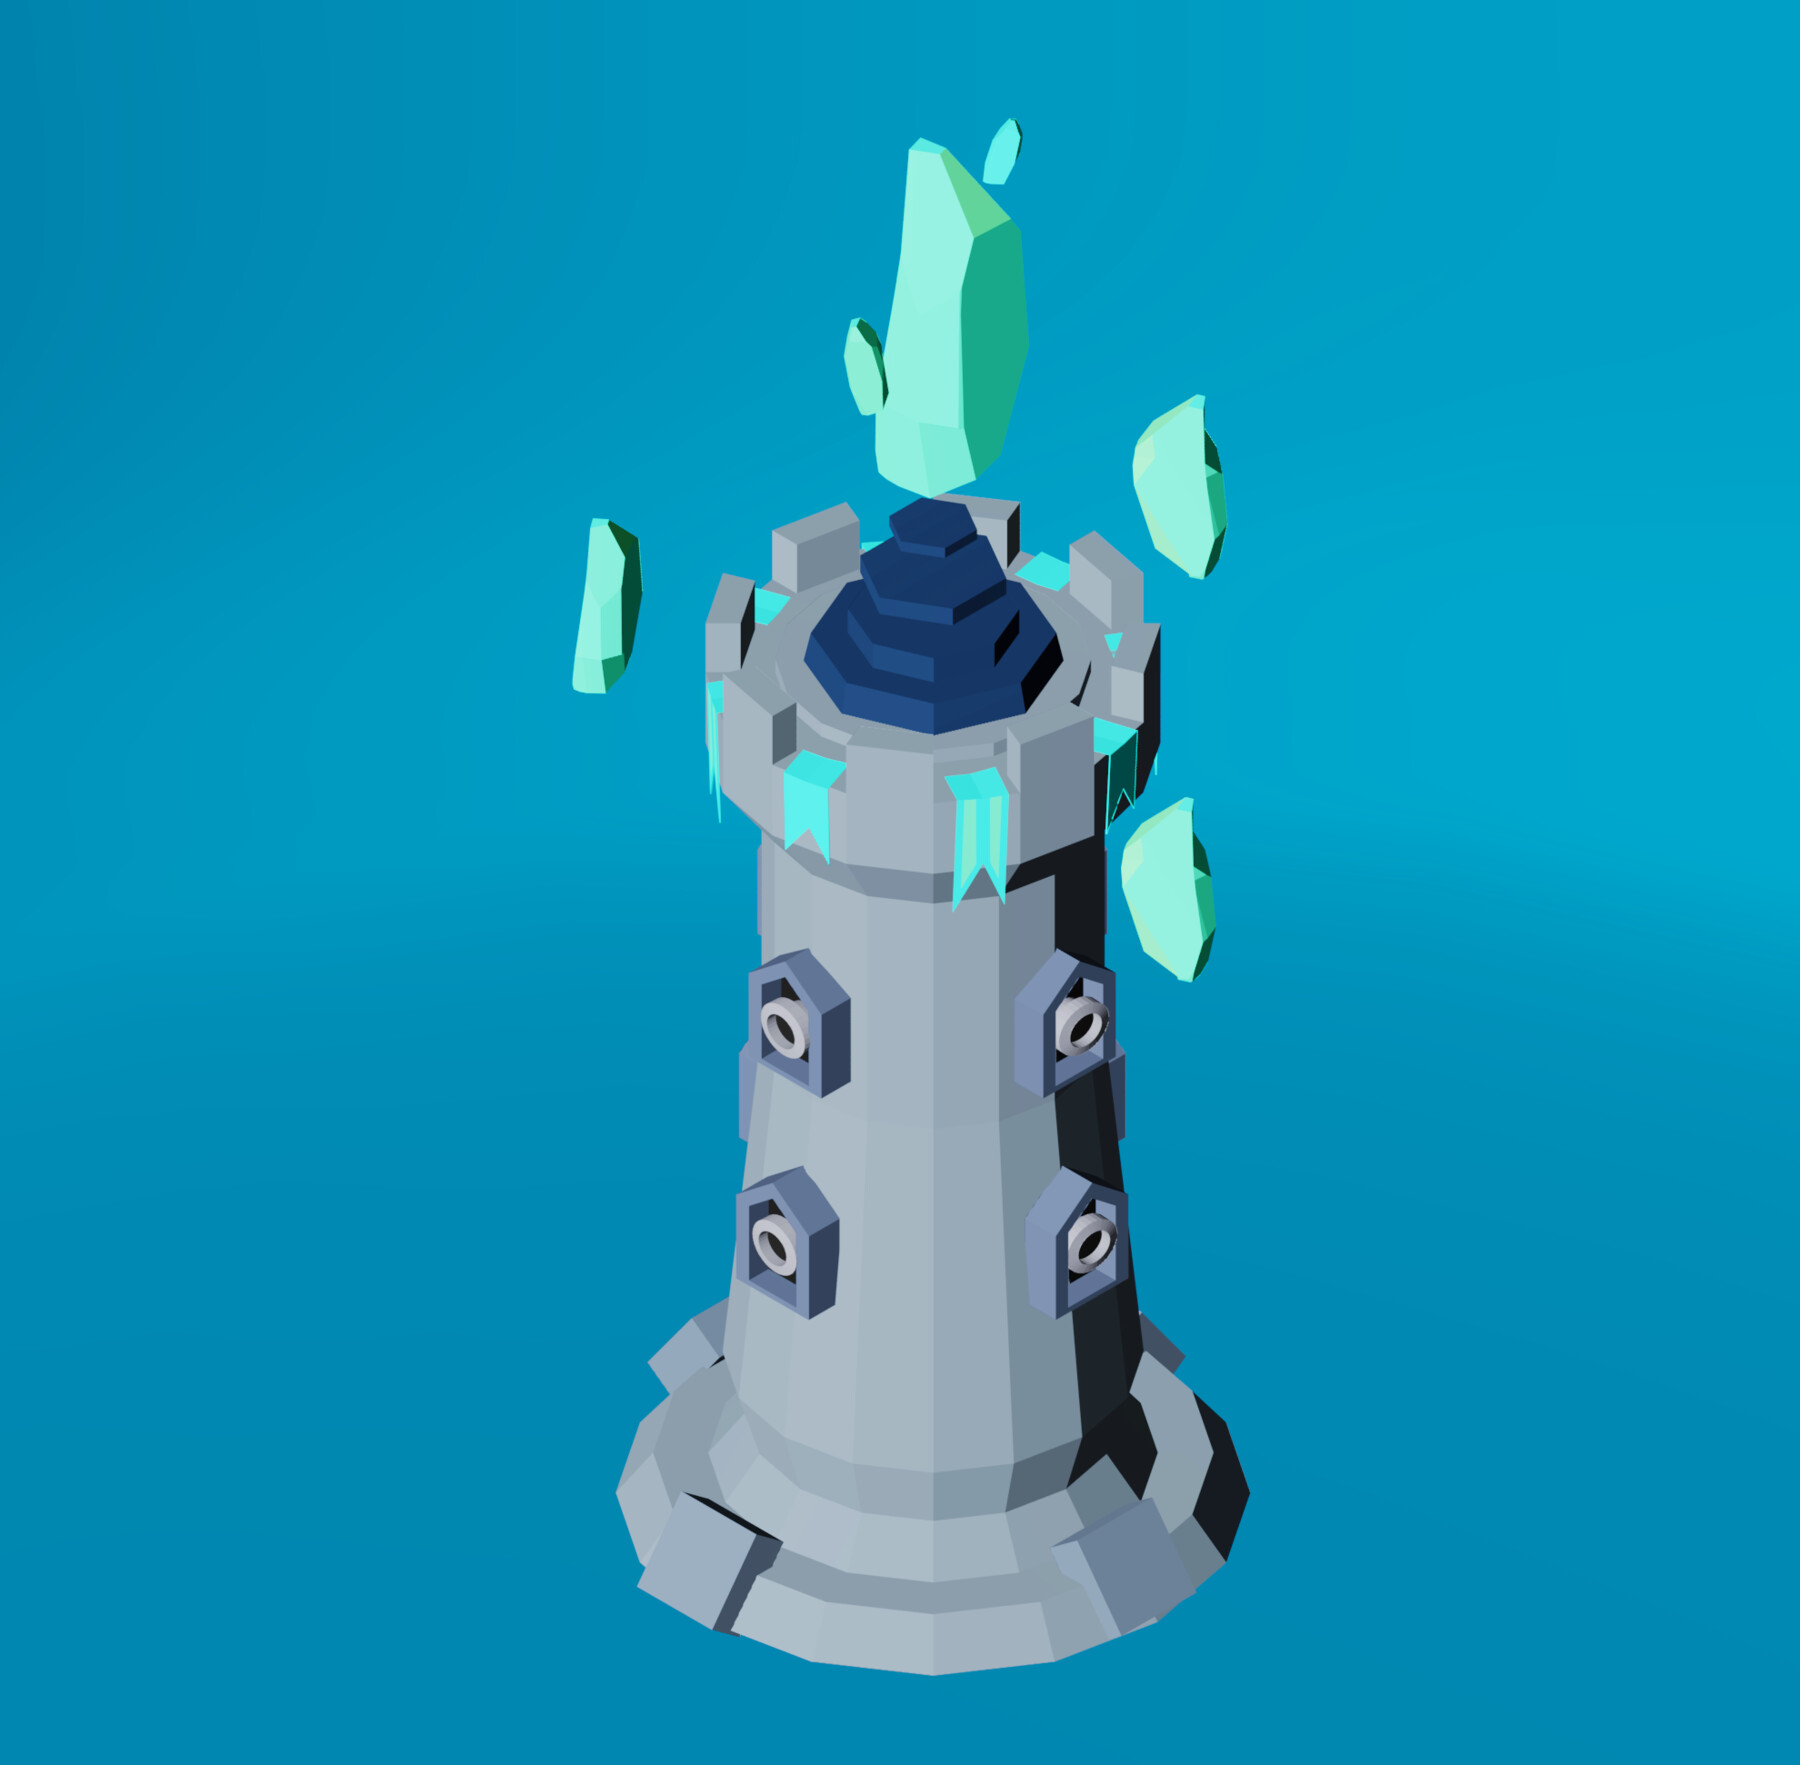 Low Poly Tower Defense in Environments - UE Marketplace